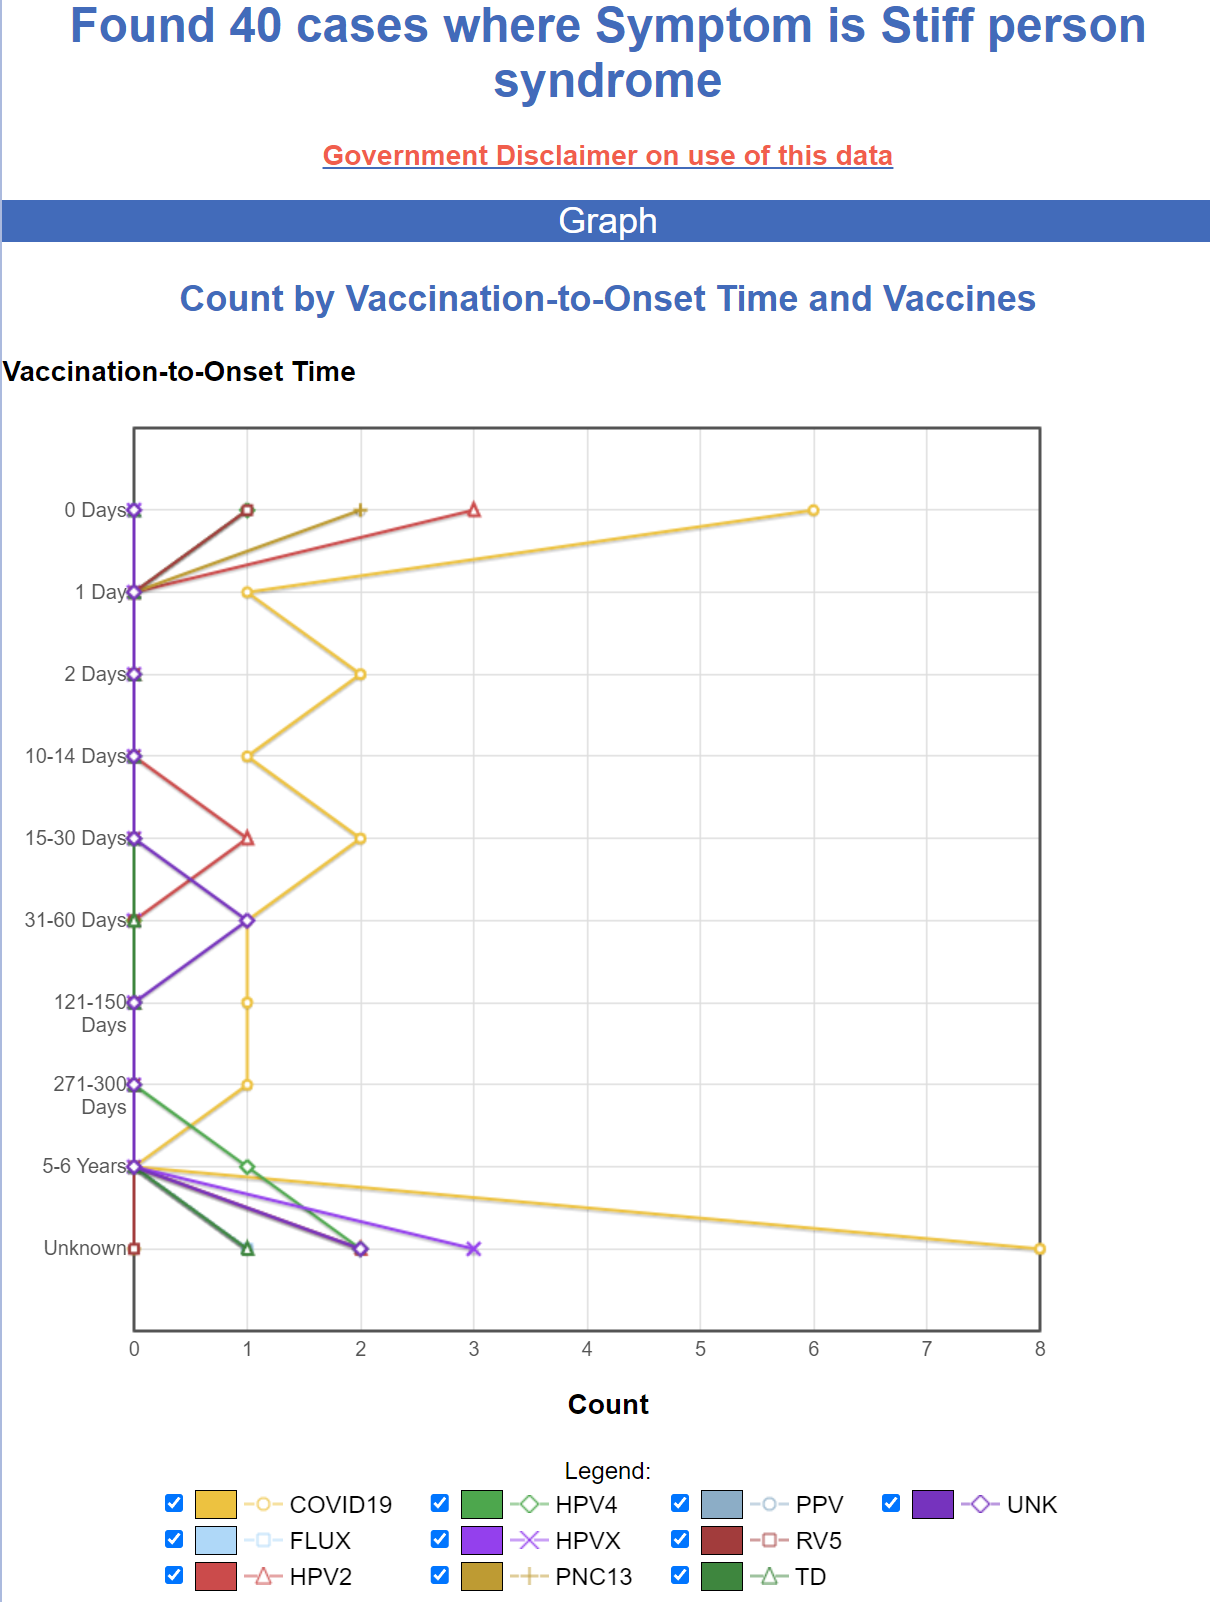 Is the CDC totally blind to all the adverse events from the COVID vaccines? Https%3A%2F%2Fsubstack-post-media.s3.amazonaws.com%2Fpublic%2Fimages%2F2a135c1c-a234-47cb-90fb-8184b37f8add_1210x1602